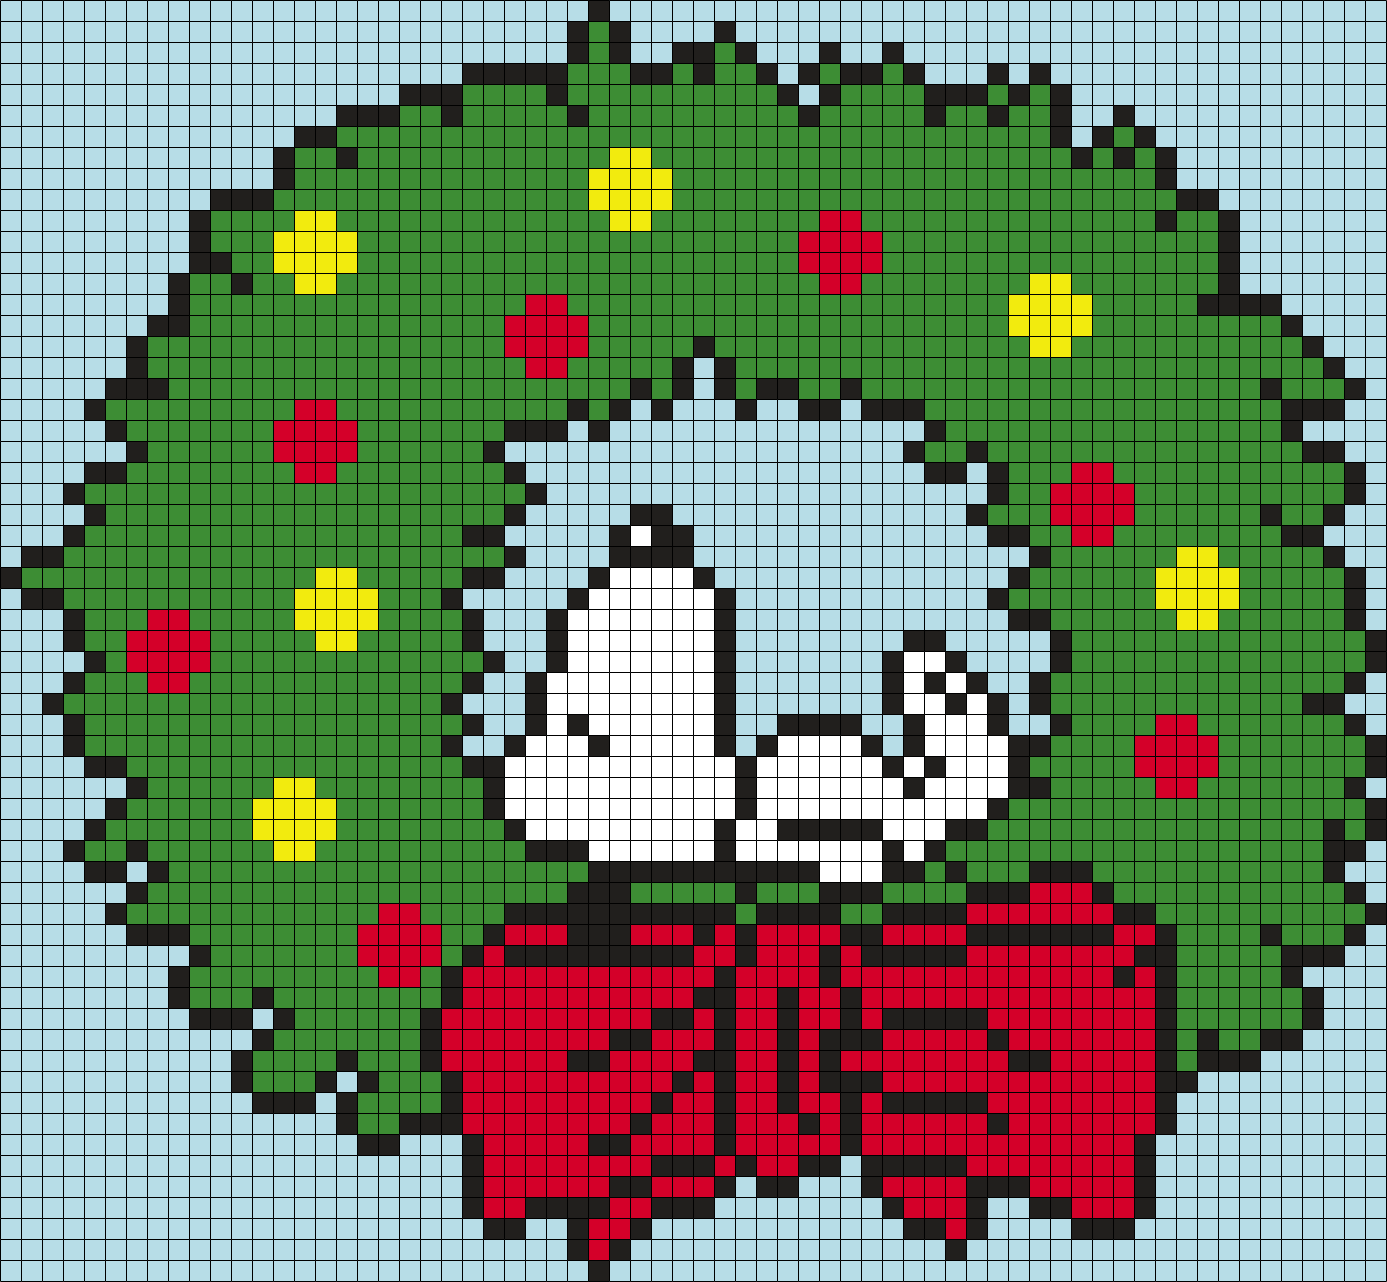 Snoopy Wreath (from Peanuts) Square Grid